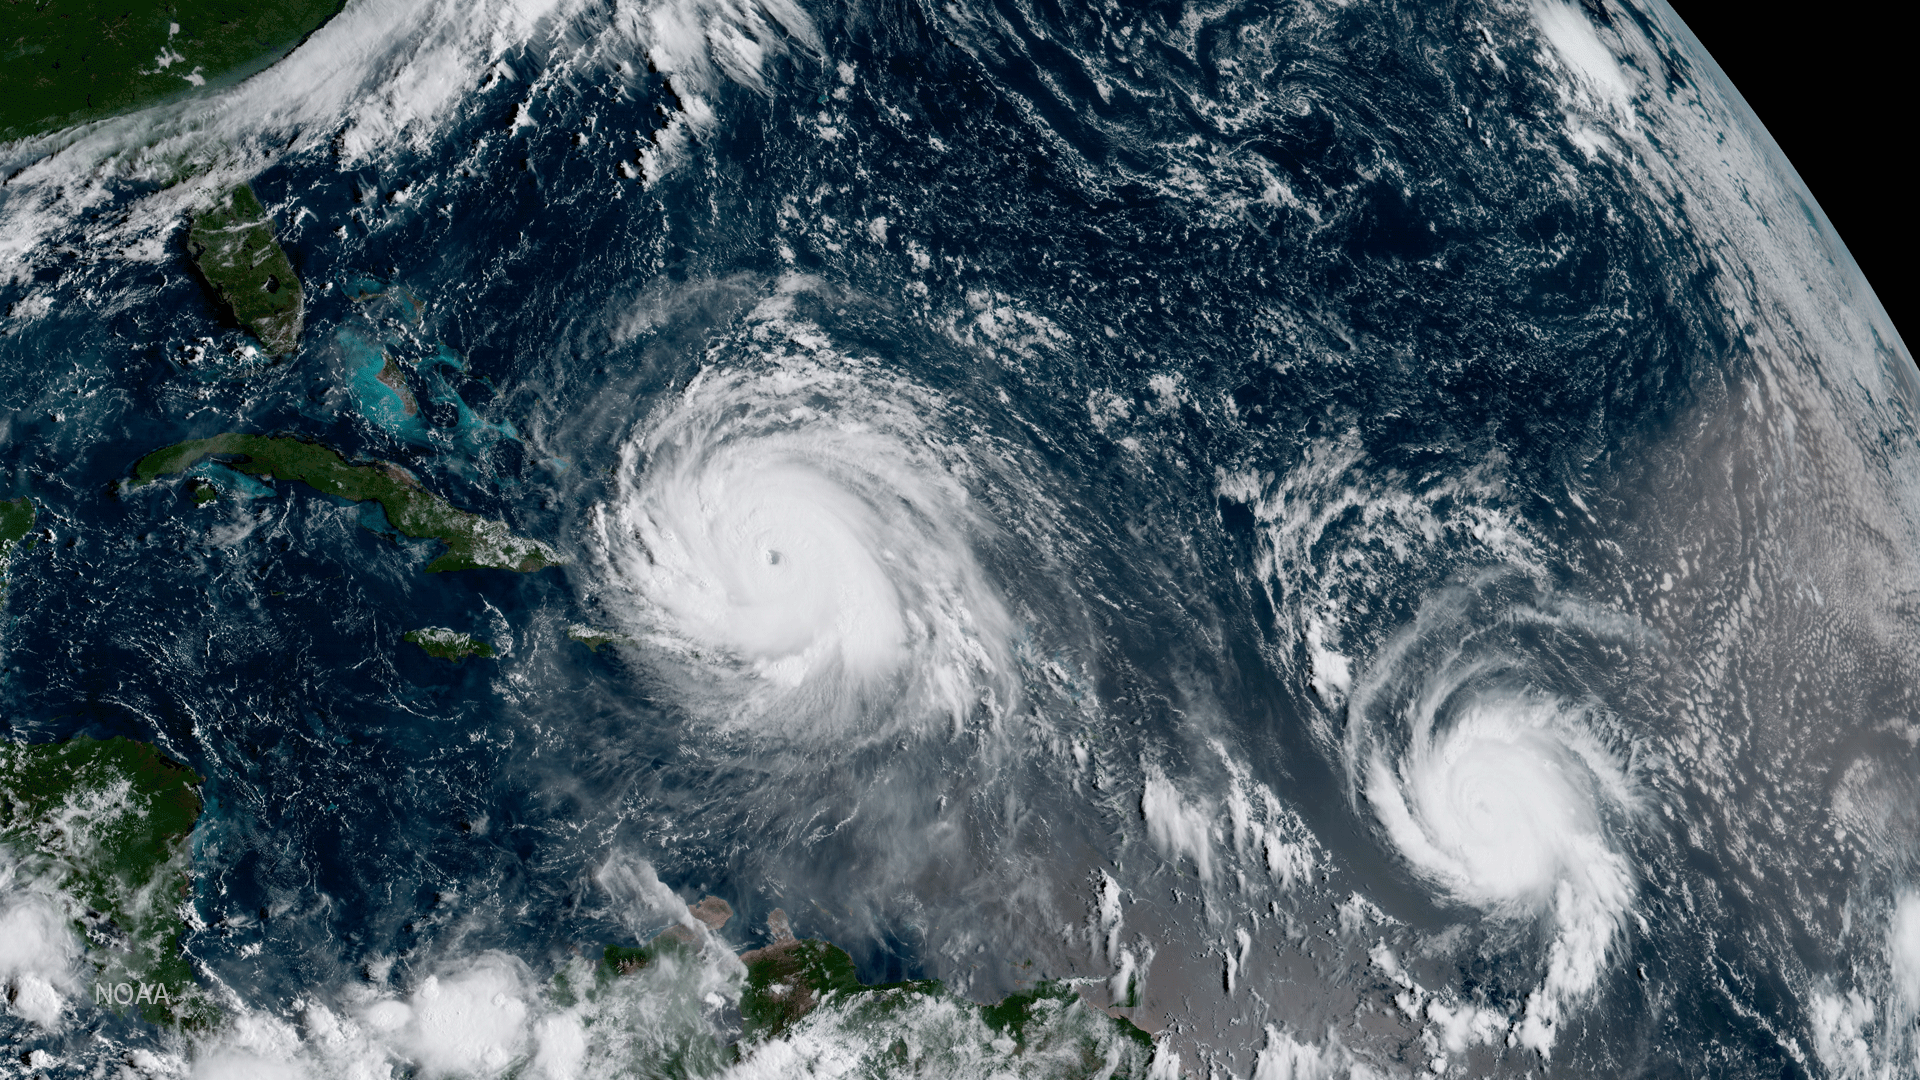 Hurricanes Irma and Jose Spin in the Atlantic